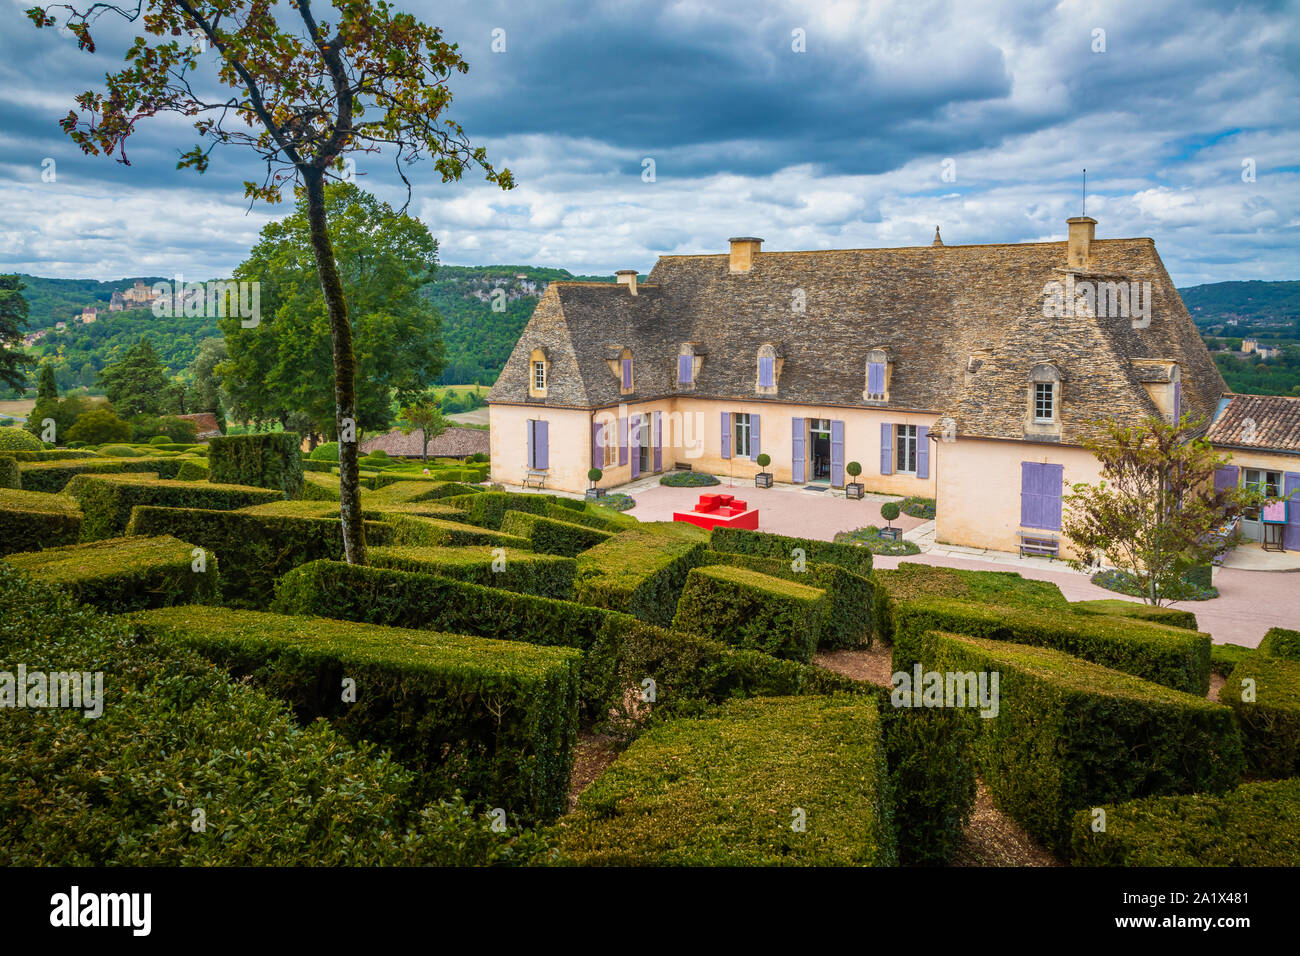 The Gardens of Marqueyssac are located in the town of Vézac, in the French area of Dordogne, in the region of Nouvelle-Aquitaine. It is on the list of Stock Photo